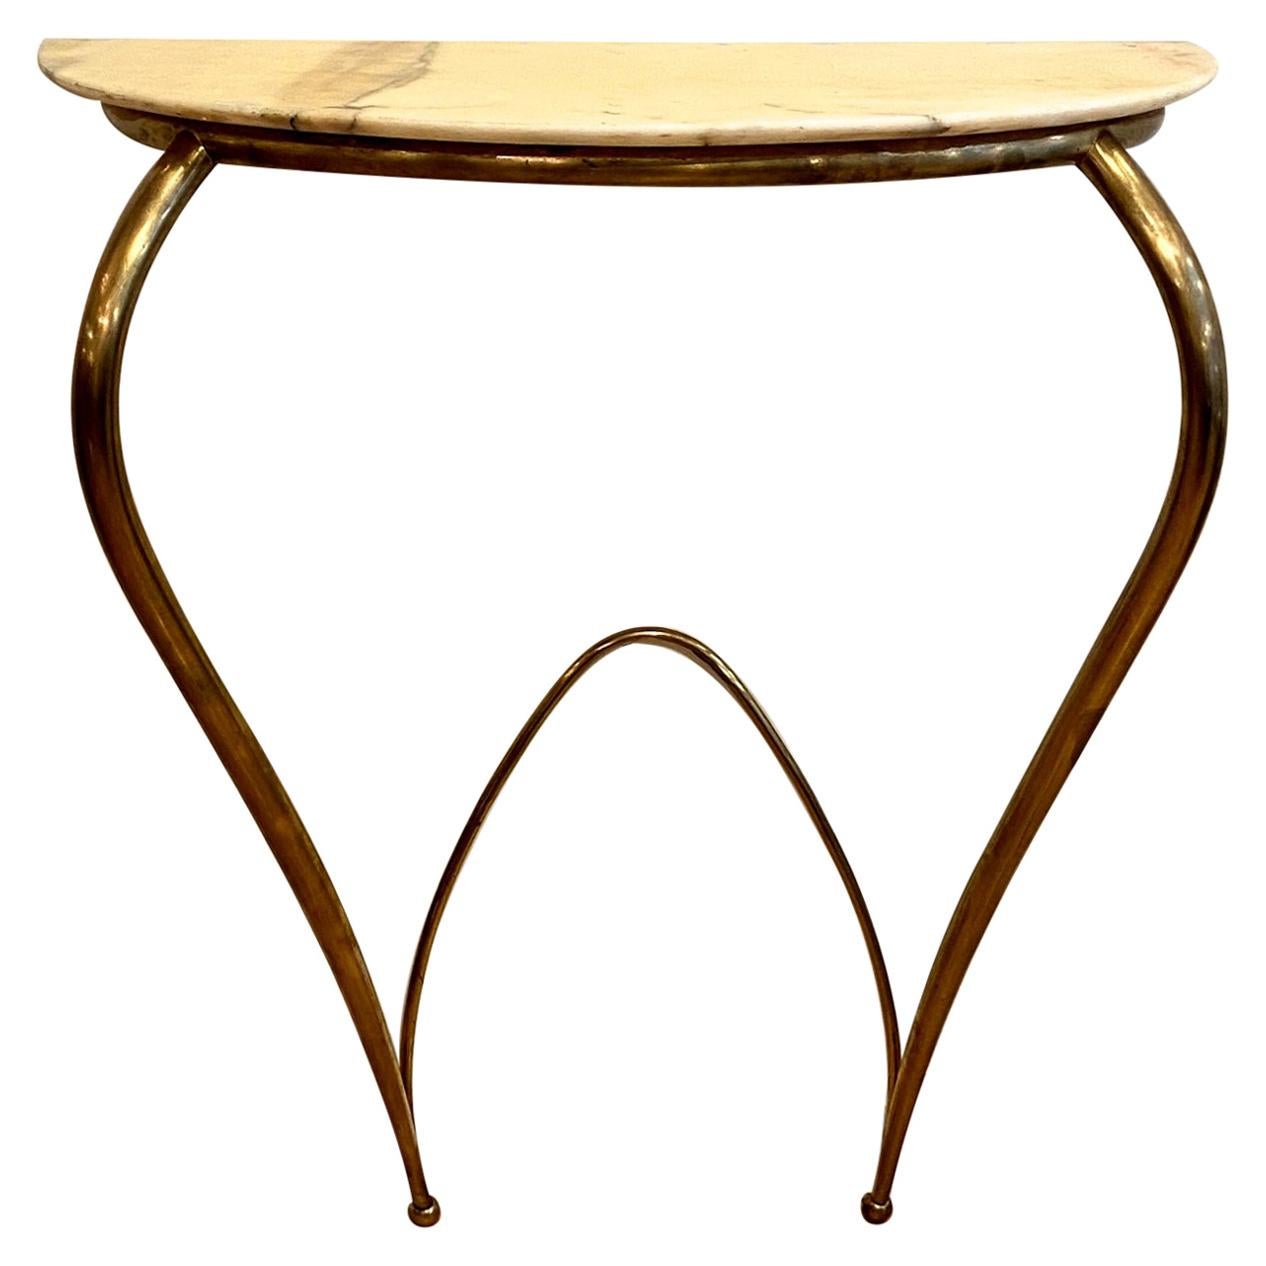 Italian Mid-Century Modern Brass and Marble Console, 1940